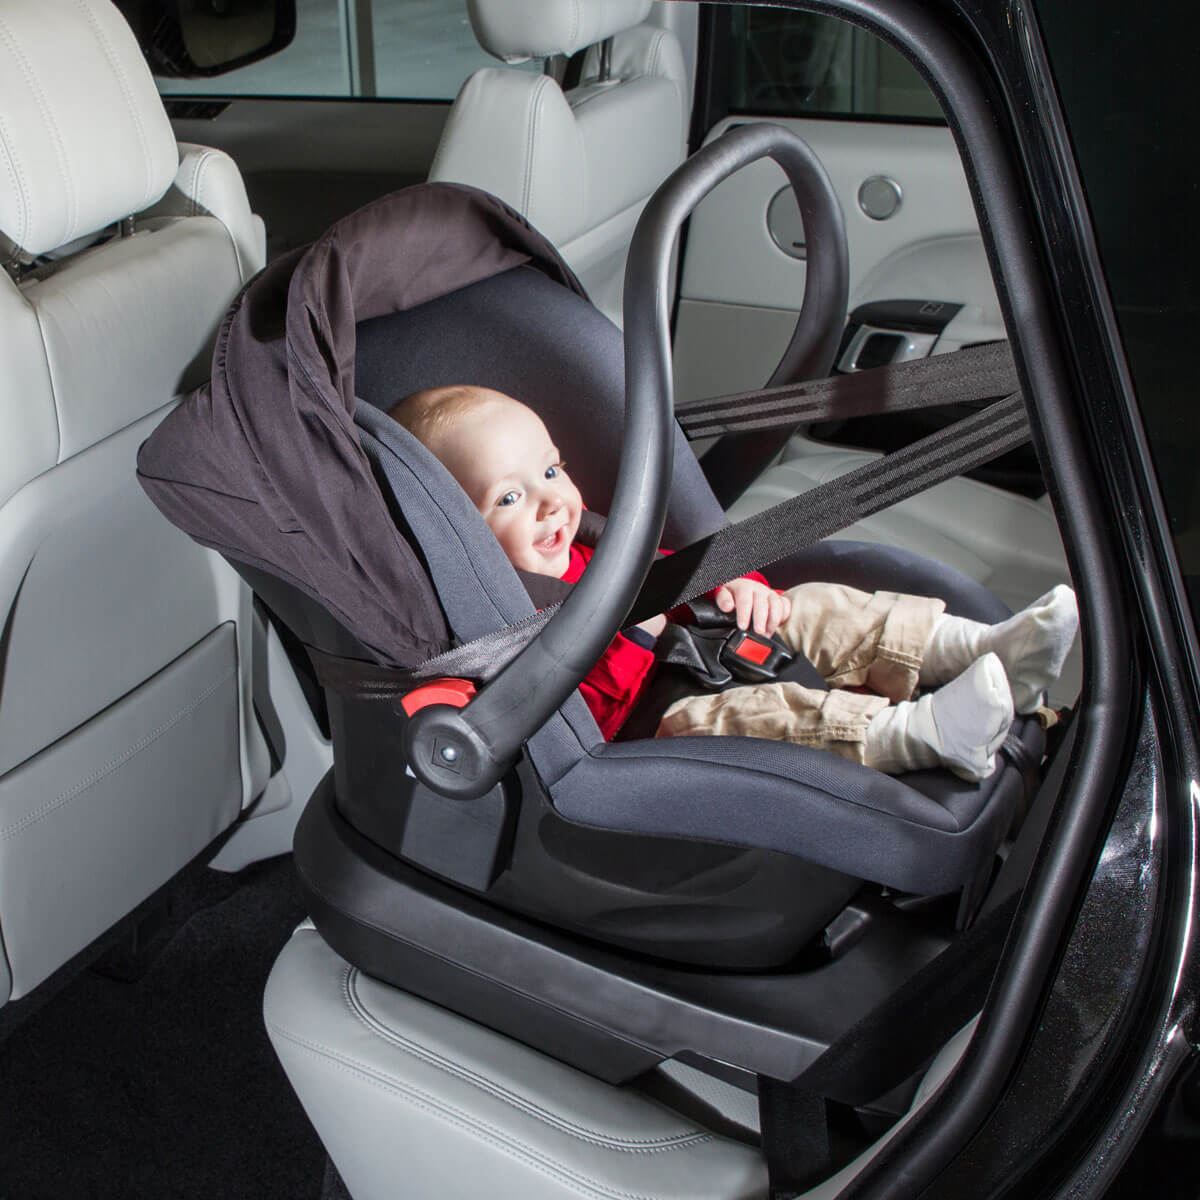 Baby Capsule/Car Seat (if you have a car)